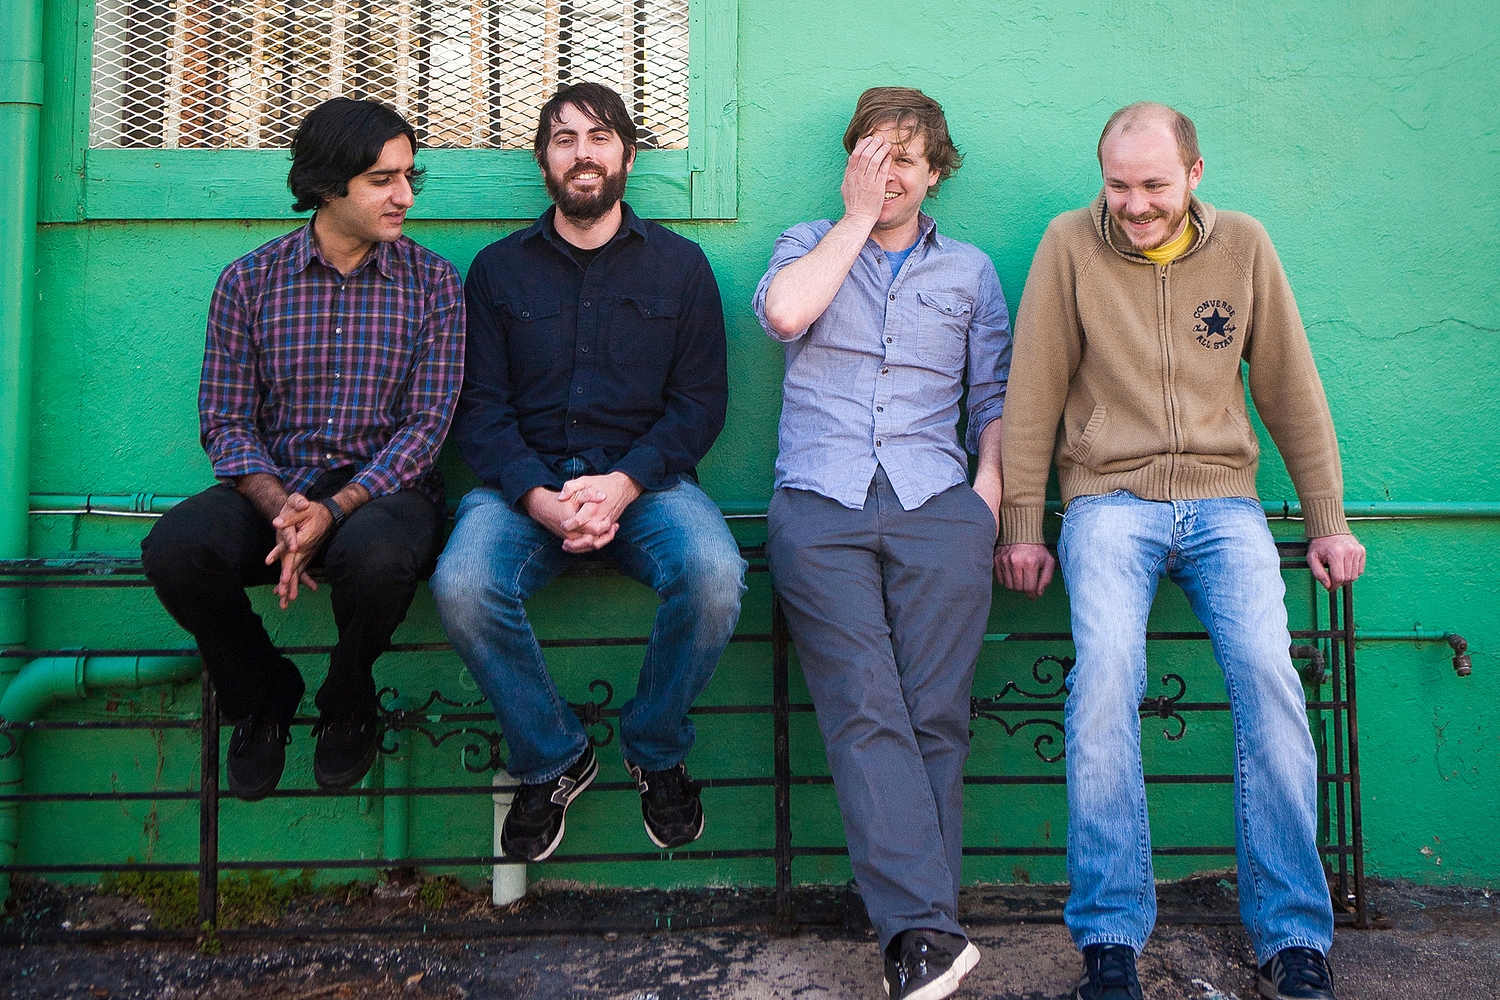 Explosions In The Sky return with UK dates and a teaser trailer